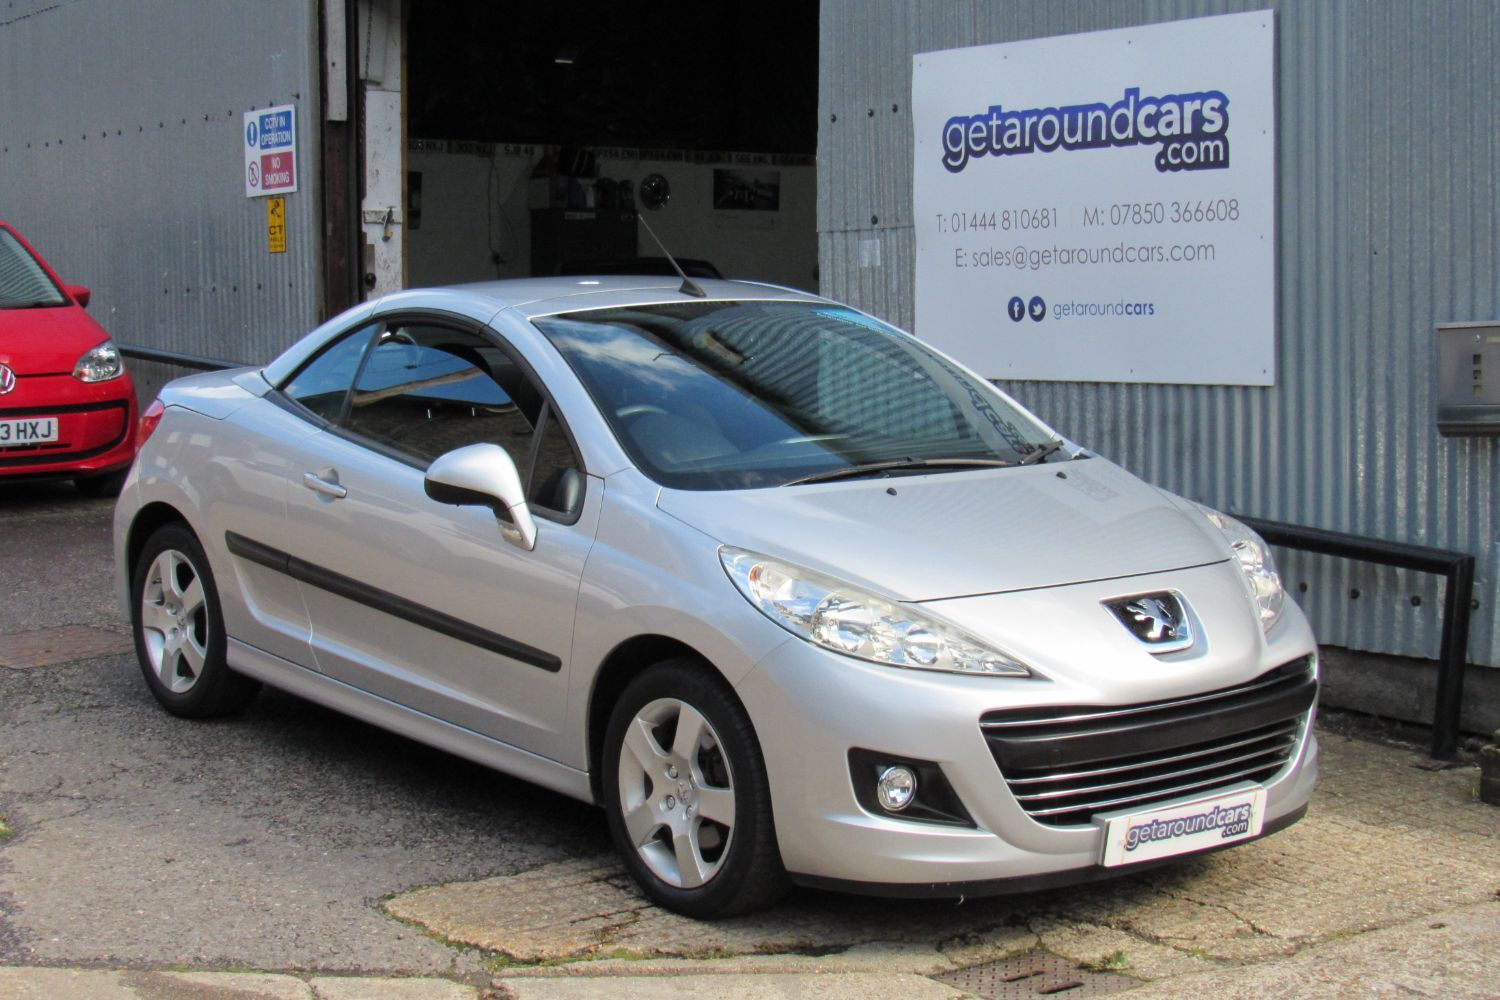 Used PEUGEOT 207 CC in Ansty, West Sussex